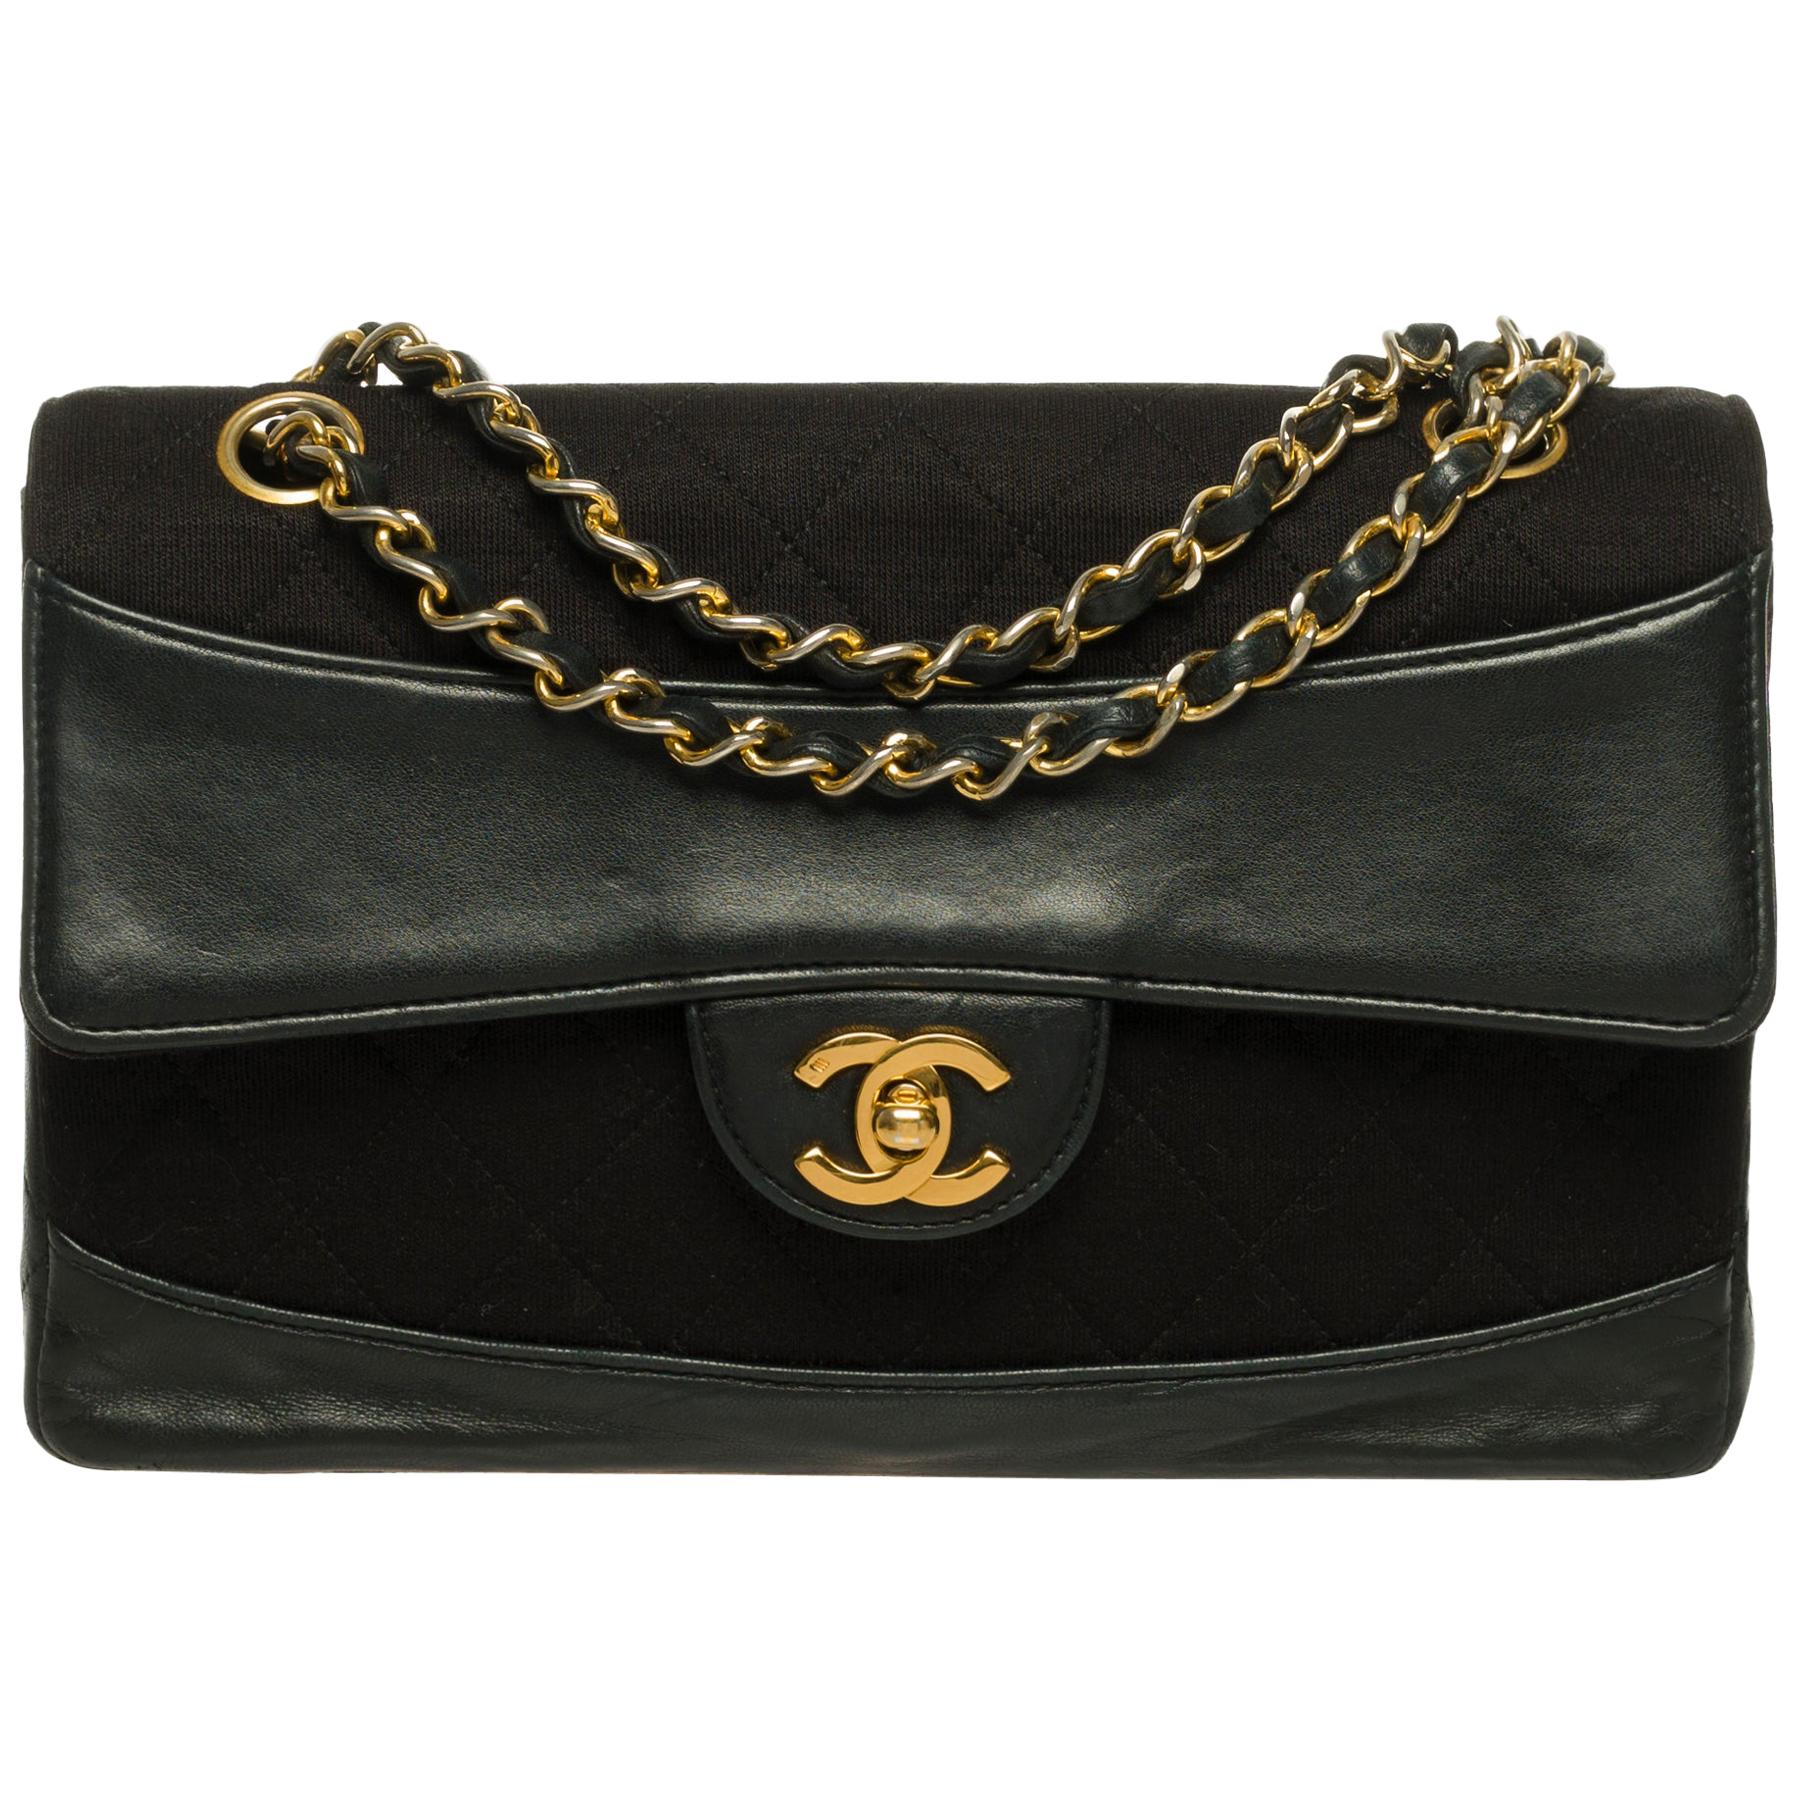 Amazing Chanel Classic bi material crossbody bag in black leather& Jersey, GHW